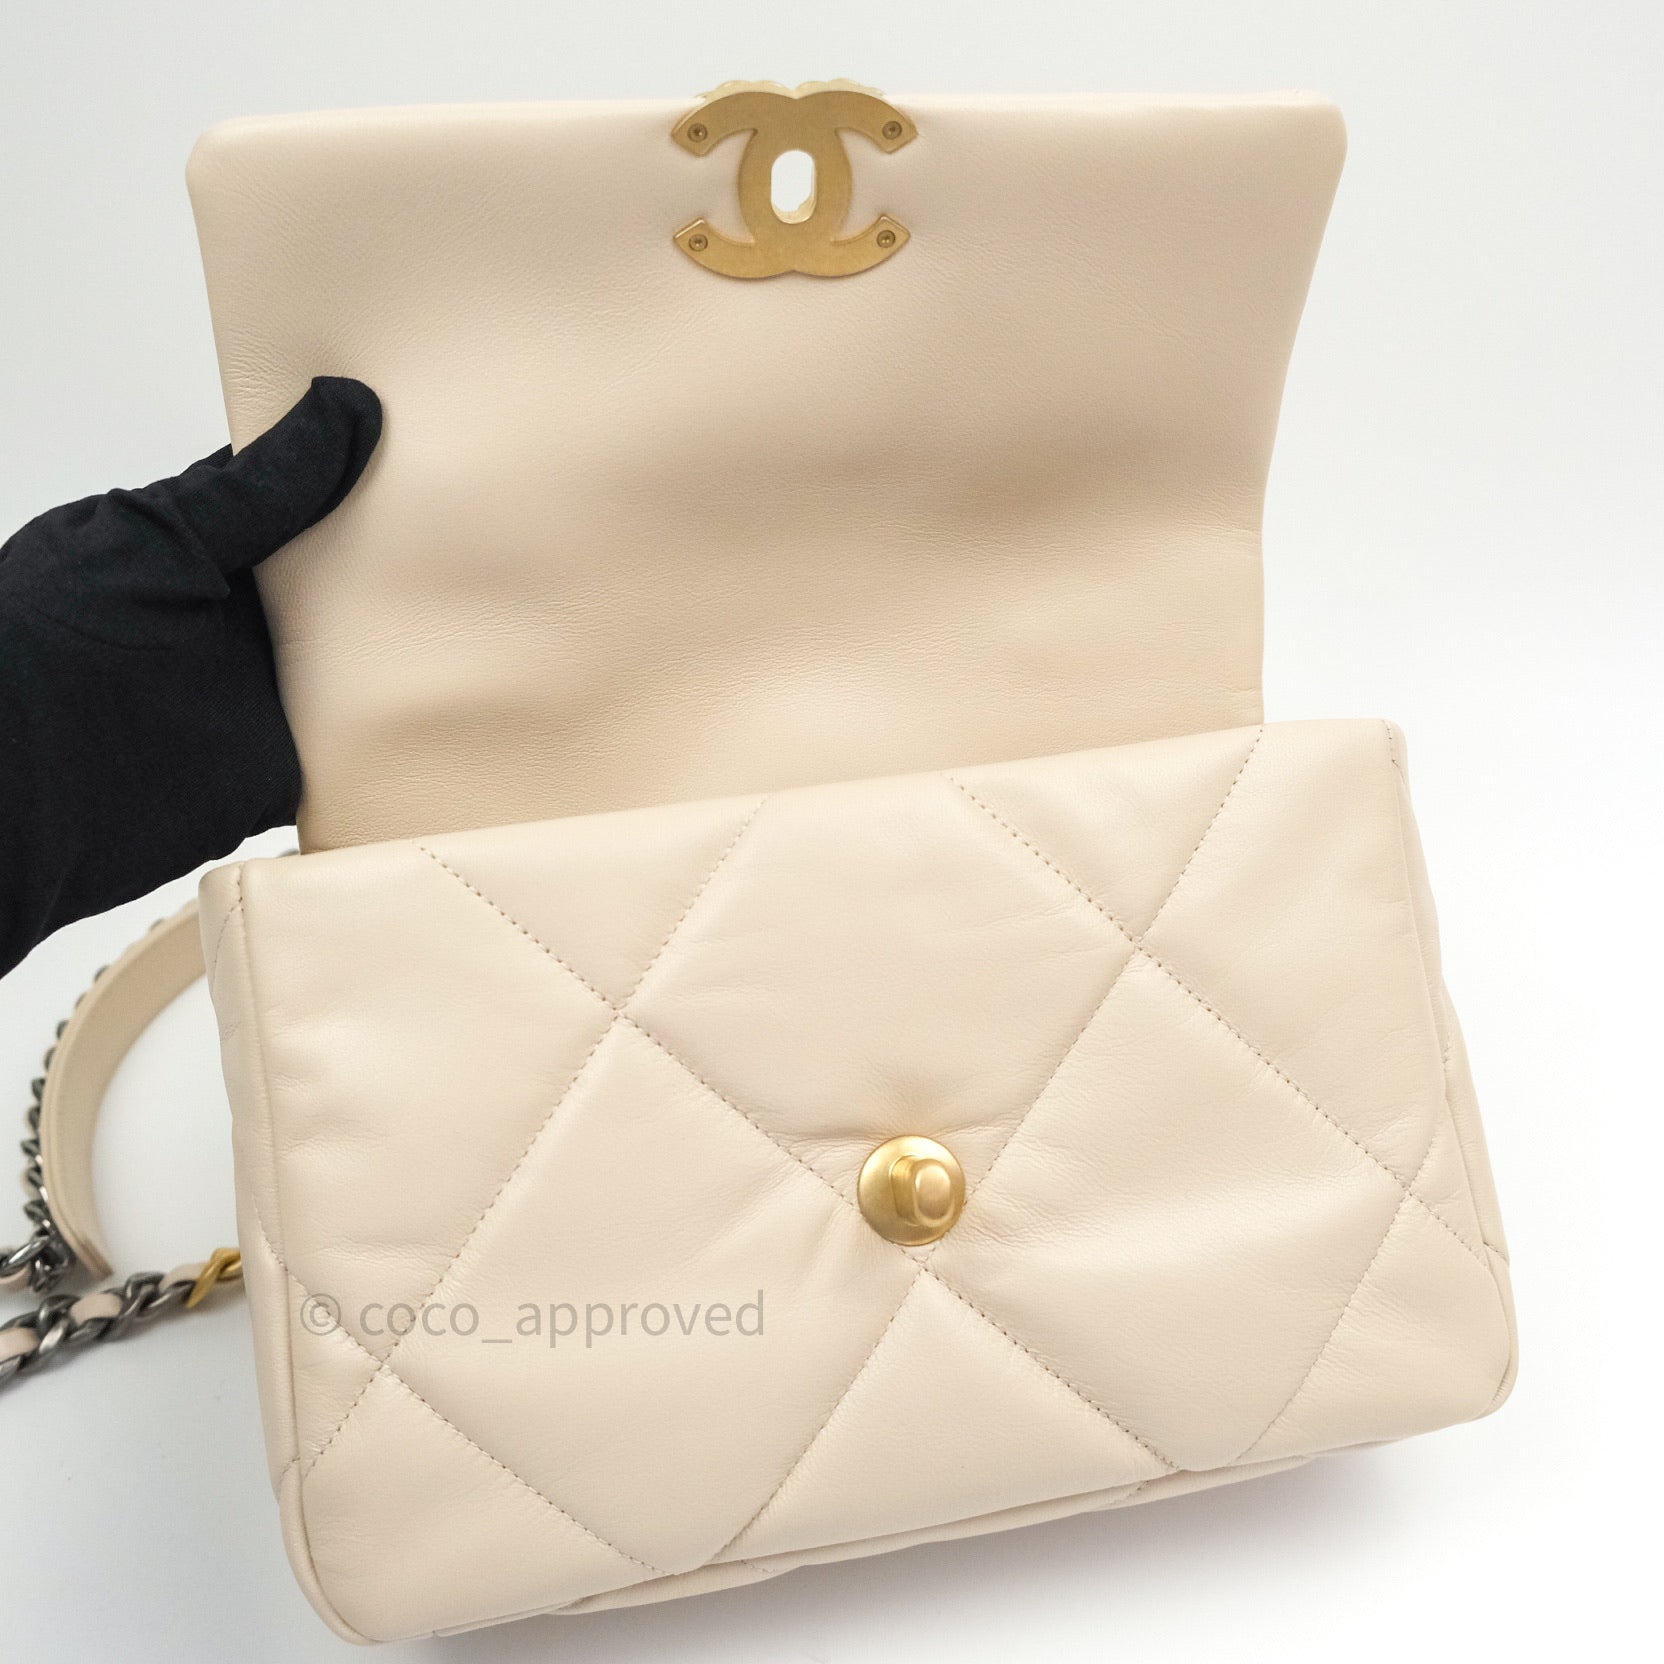 Chanel 19 Small Beige Goatskin Mixed Hardware – Coco Approved Studio